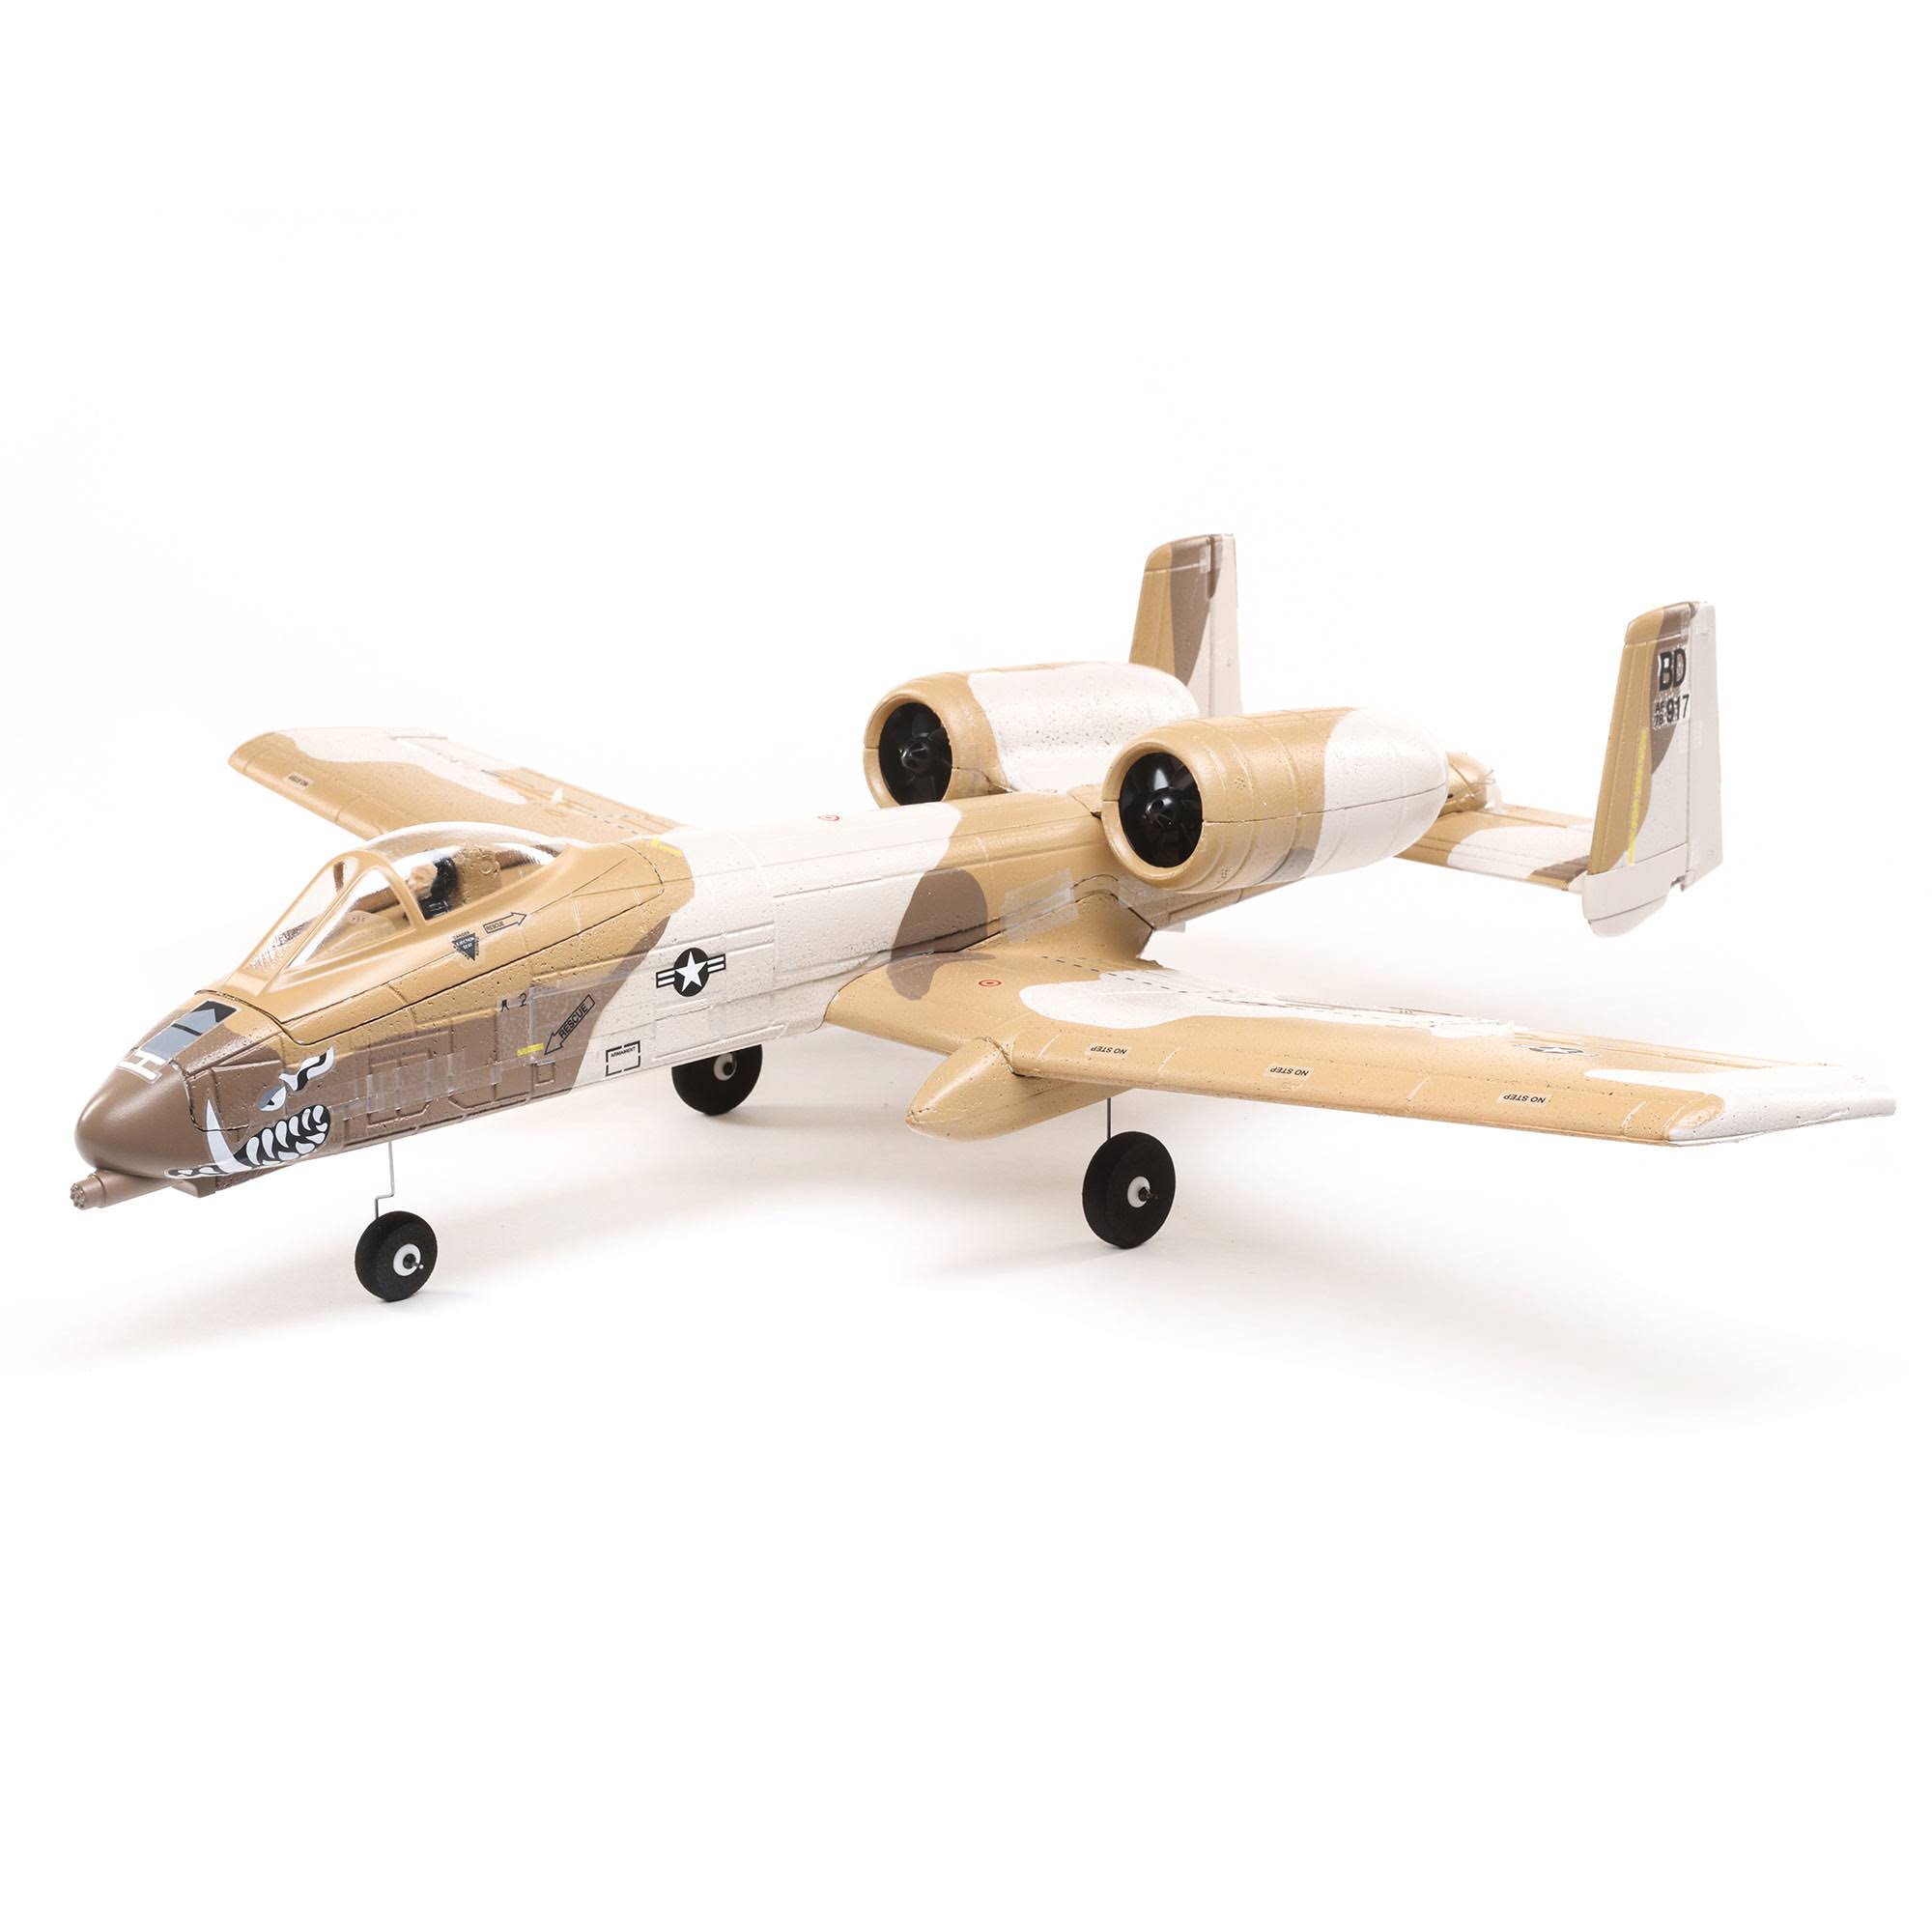 E-flite RC Airplane UMX A-10 Thunderbolt II 30mm EDF BNF Basic Transmitter Battery and Charger not Included with AS3X and Safe Select 562mm EFLU6550